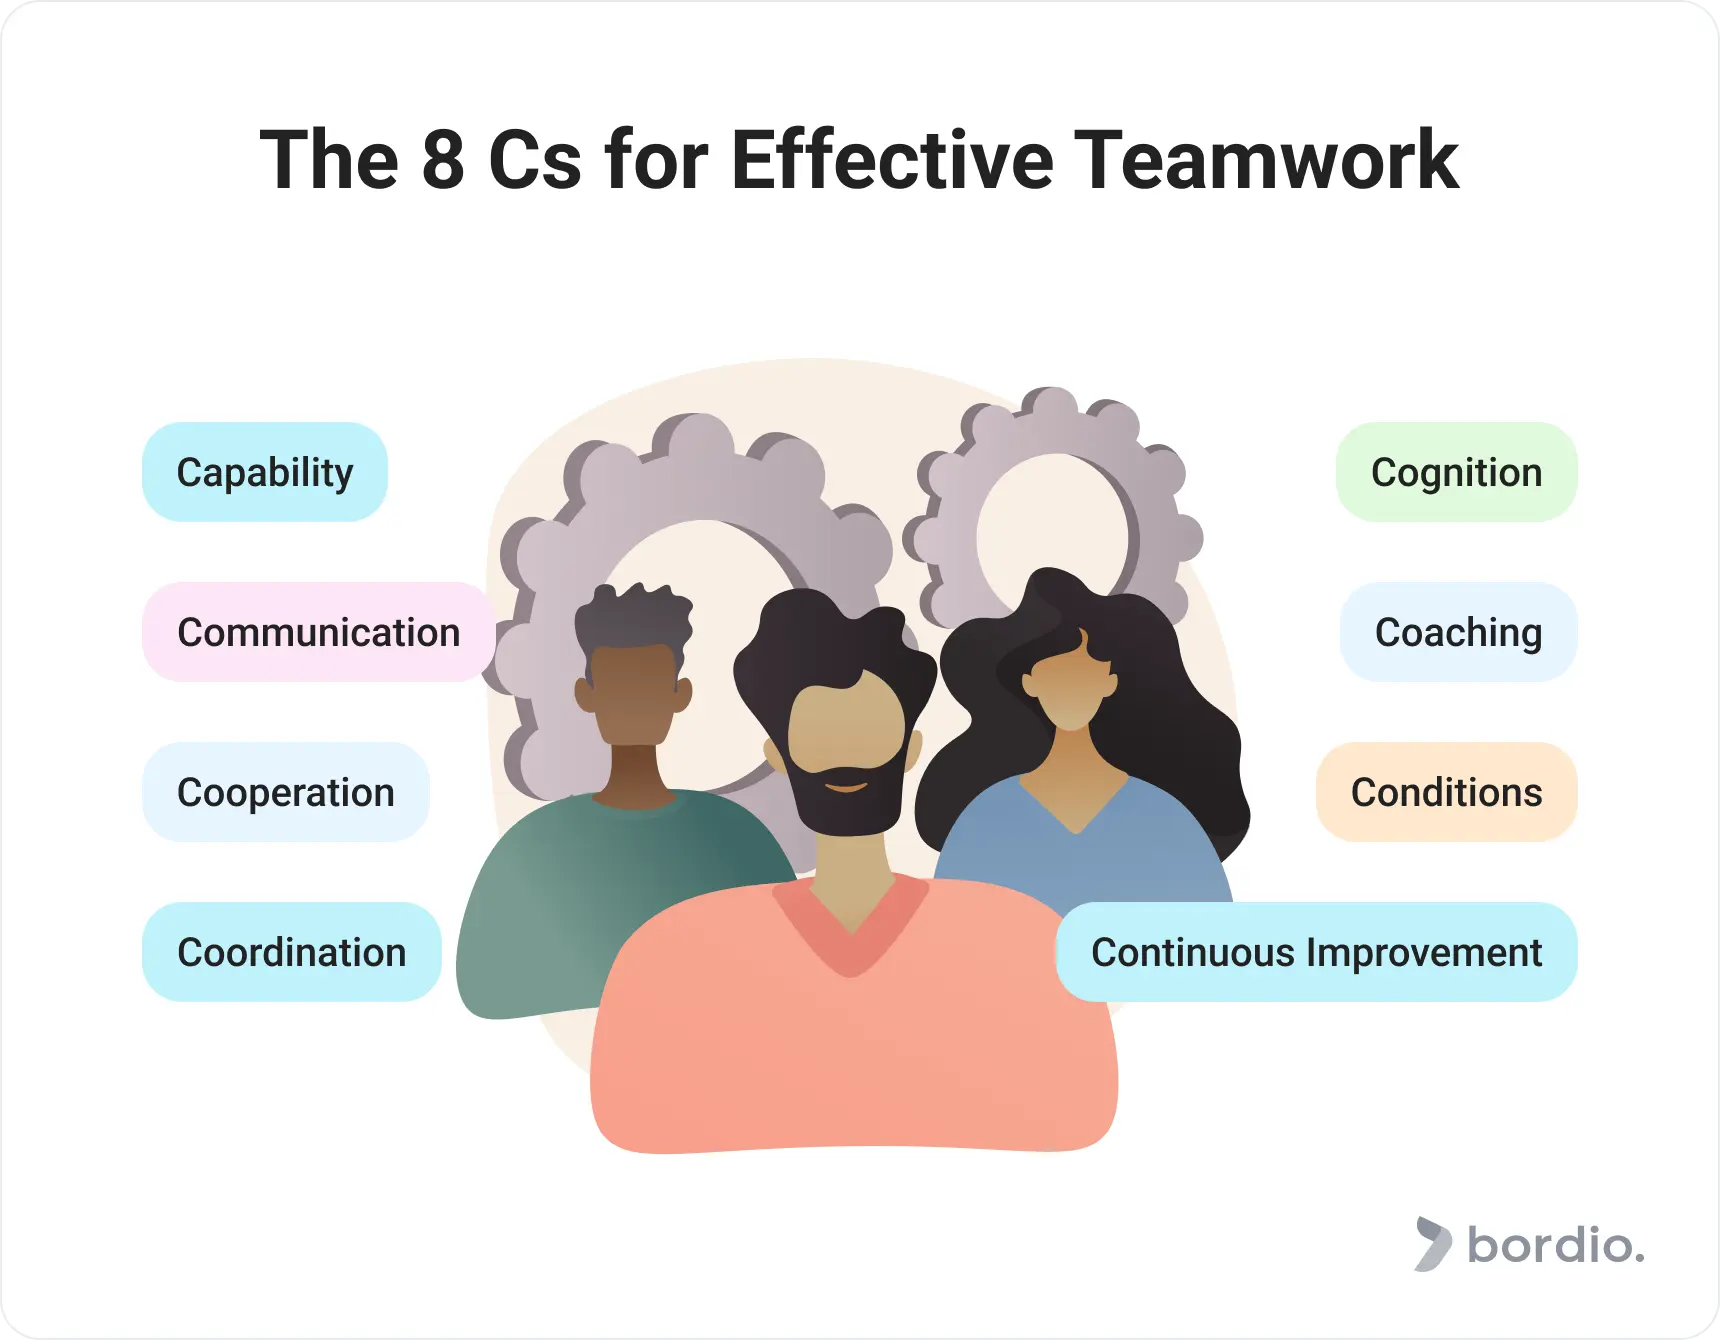 The 8 C's of Effective Teamwork